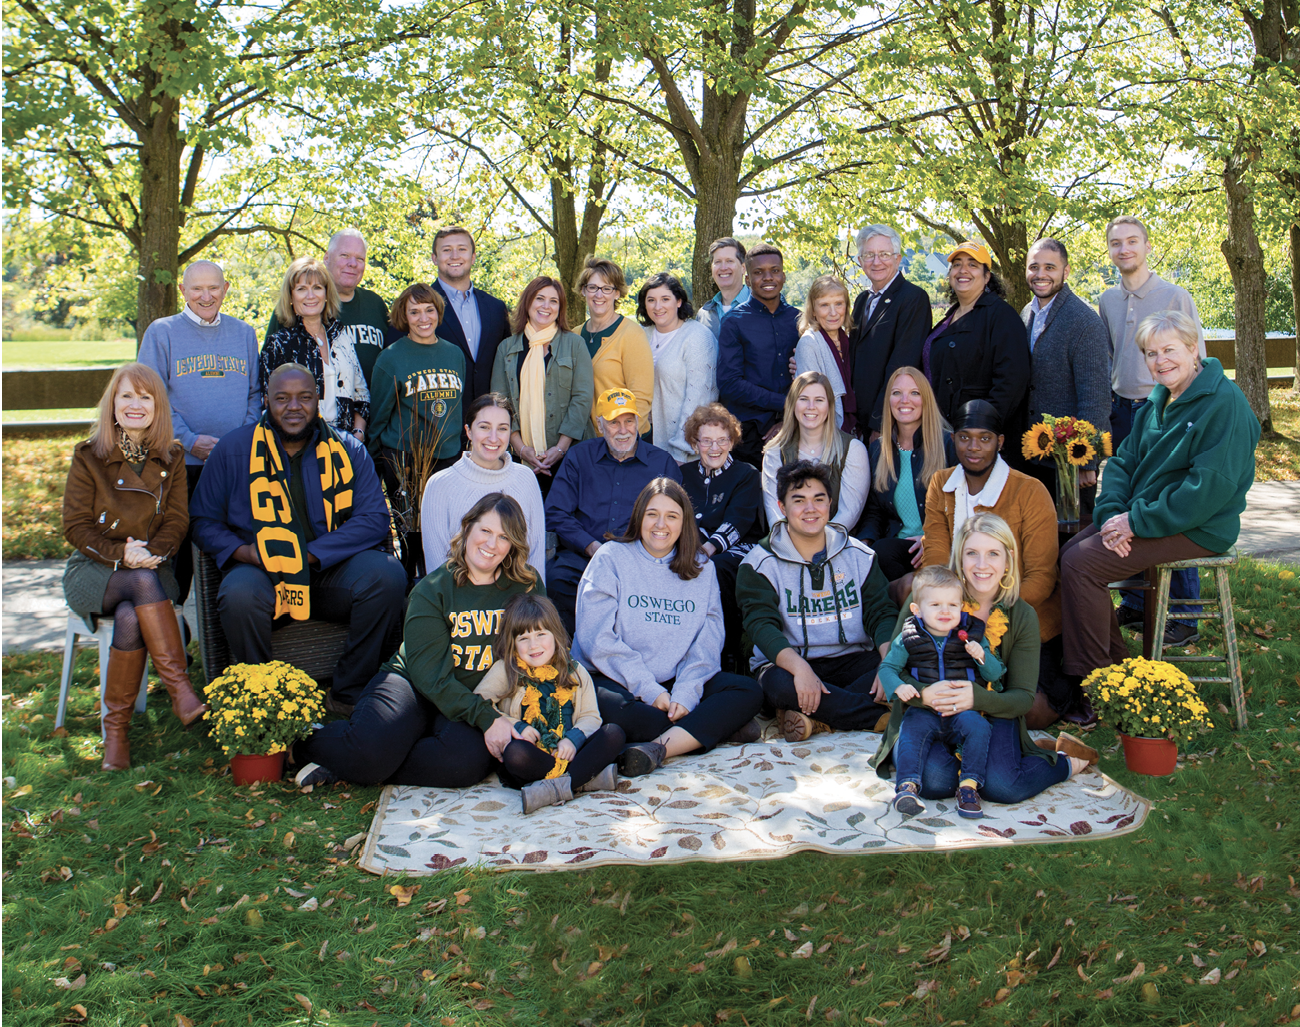 Pictured: Alumni and future and current students of SUNY Oswego posing for photo on grass outside of Tyler Hall at SUNY Oswego